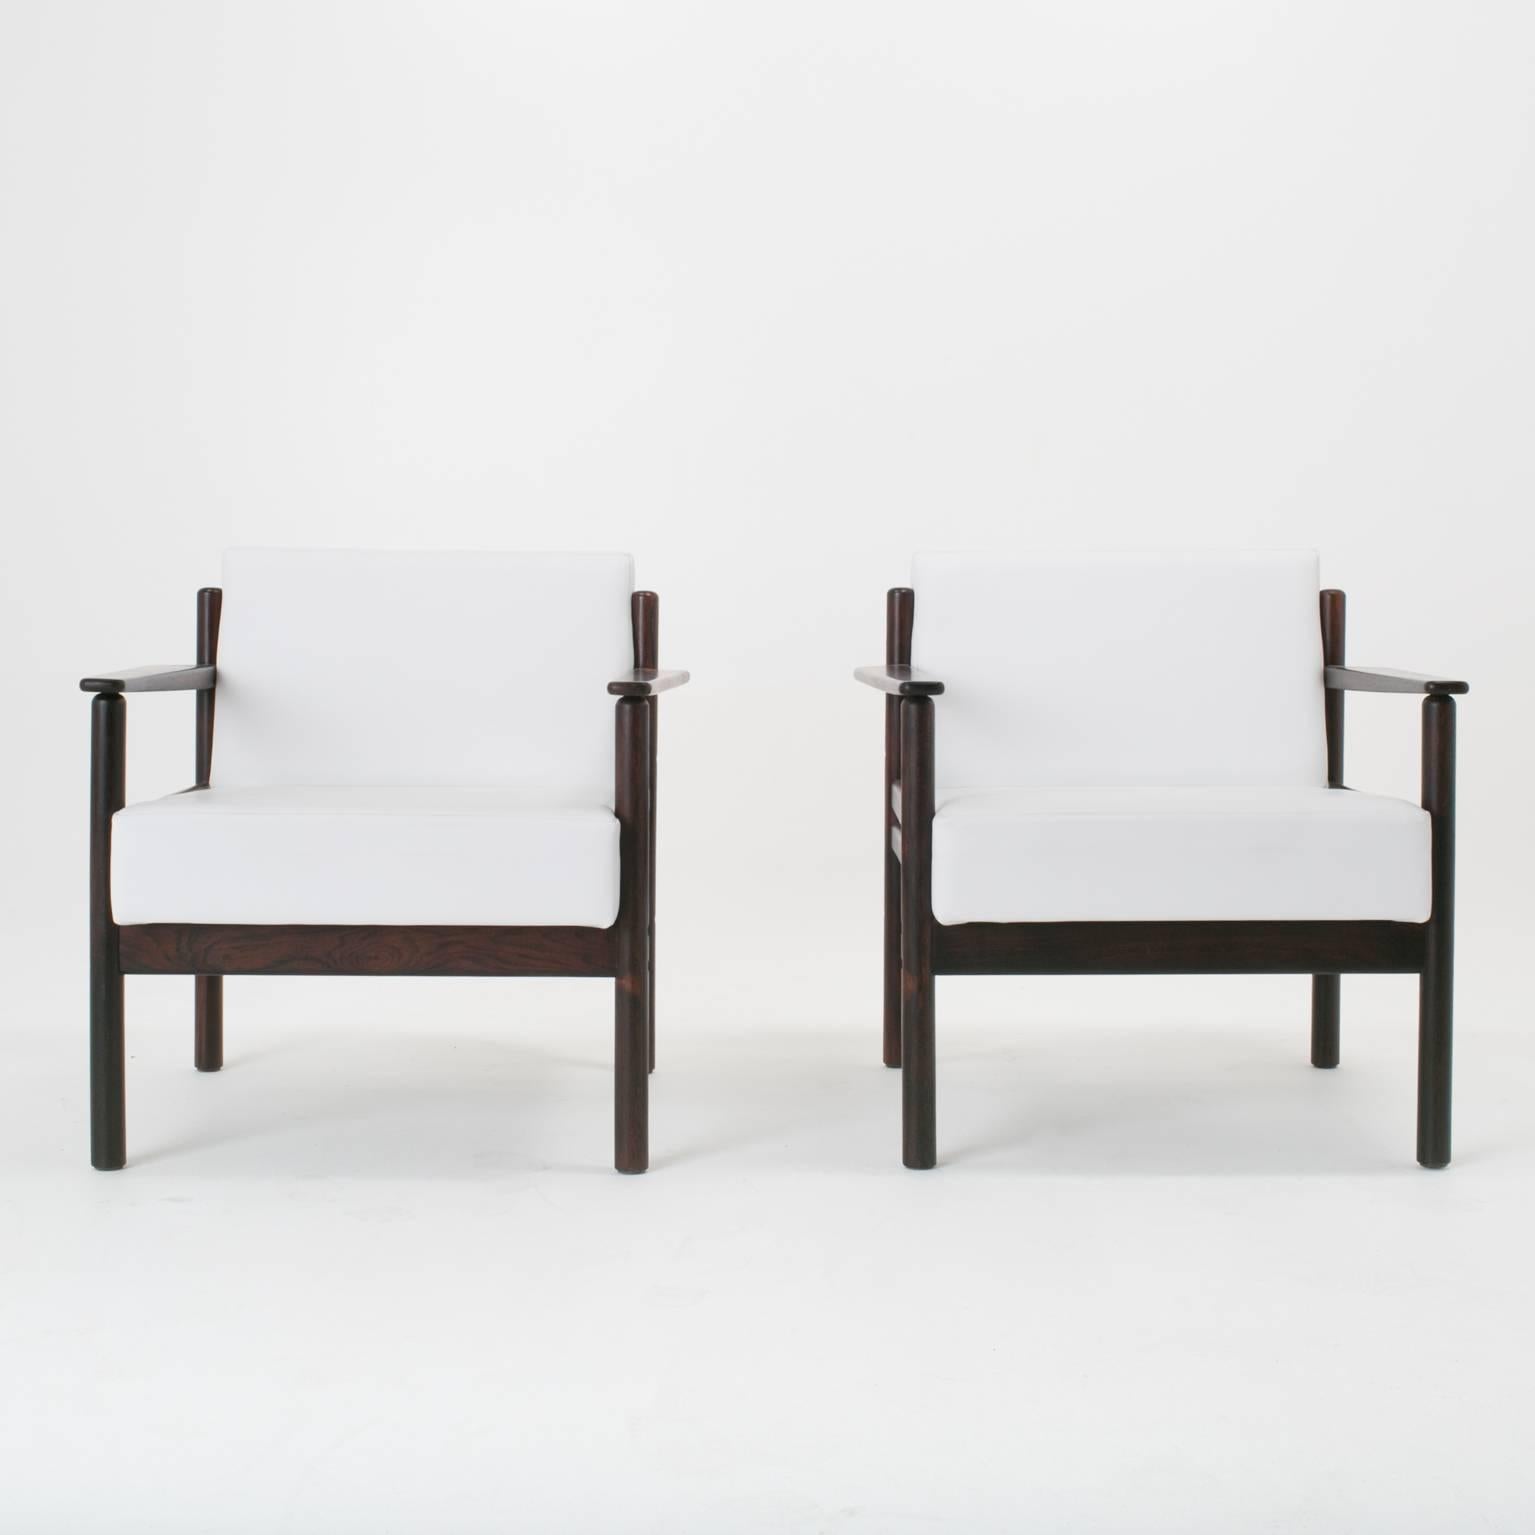 Set of simple and sleek Brazilian Rosewood armchairs. Chairs recently restored and reupholstered in a supple white leather.


Measures: The arm height is 22.00 inches
The seat depth is 22.00 inches

In order to preserve our inventory, after